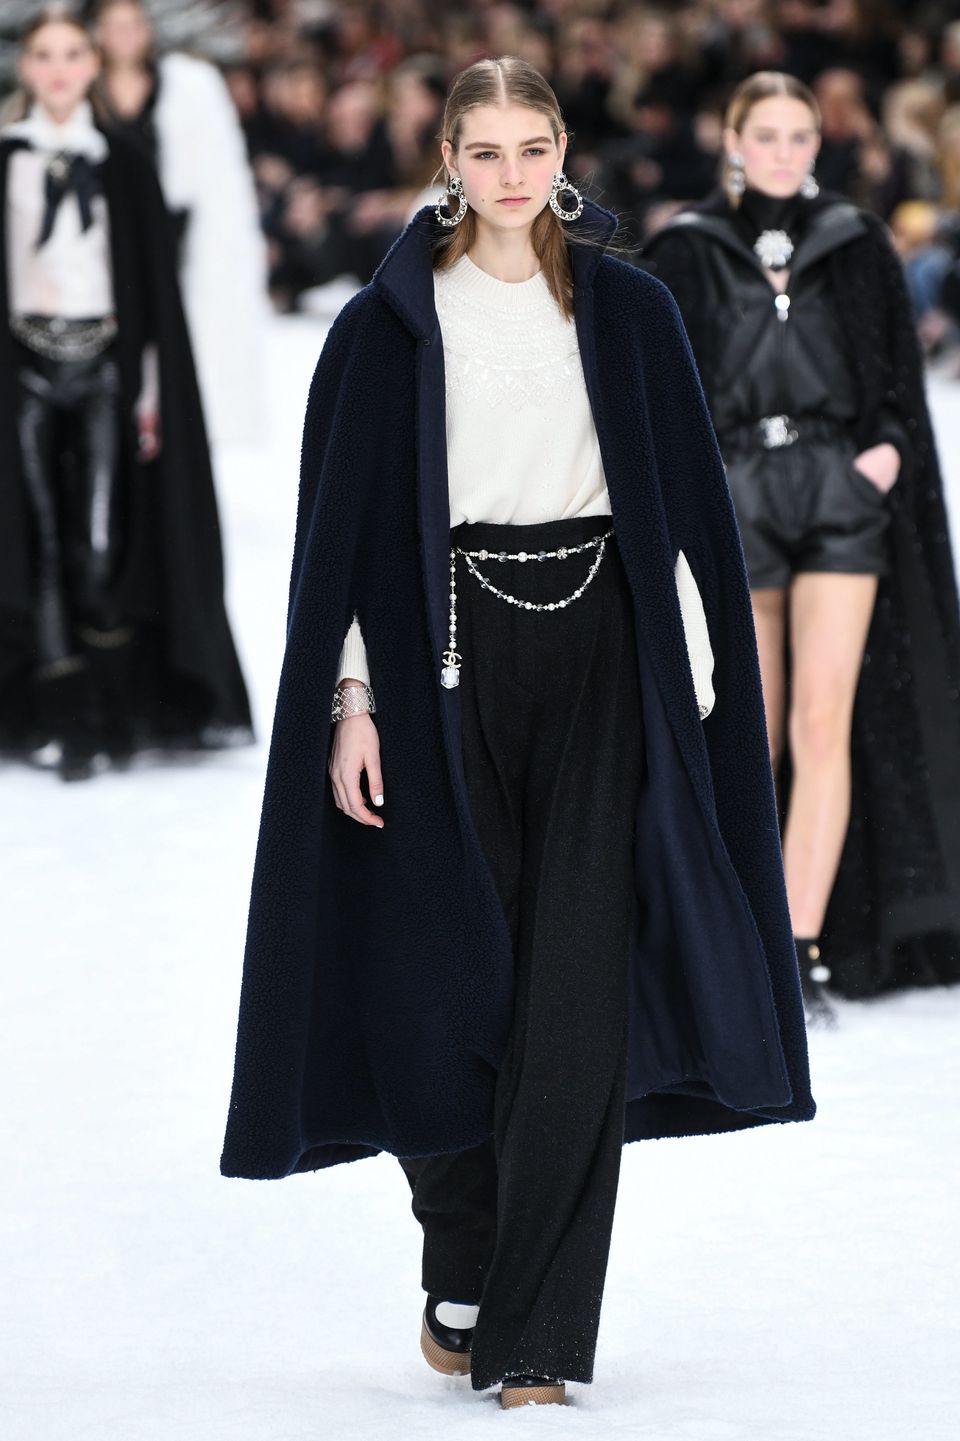 Karl Lagerfeld's Final Chanel Show: See All The Photos | HuffPost Life